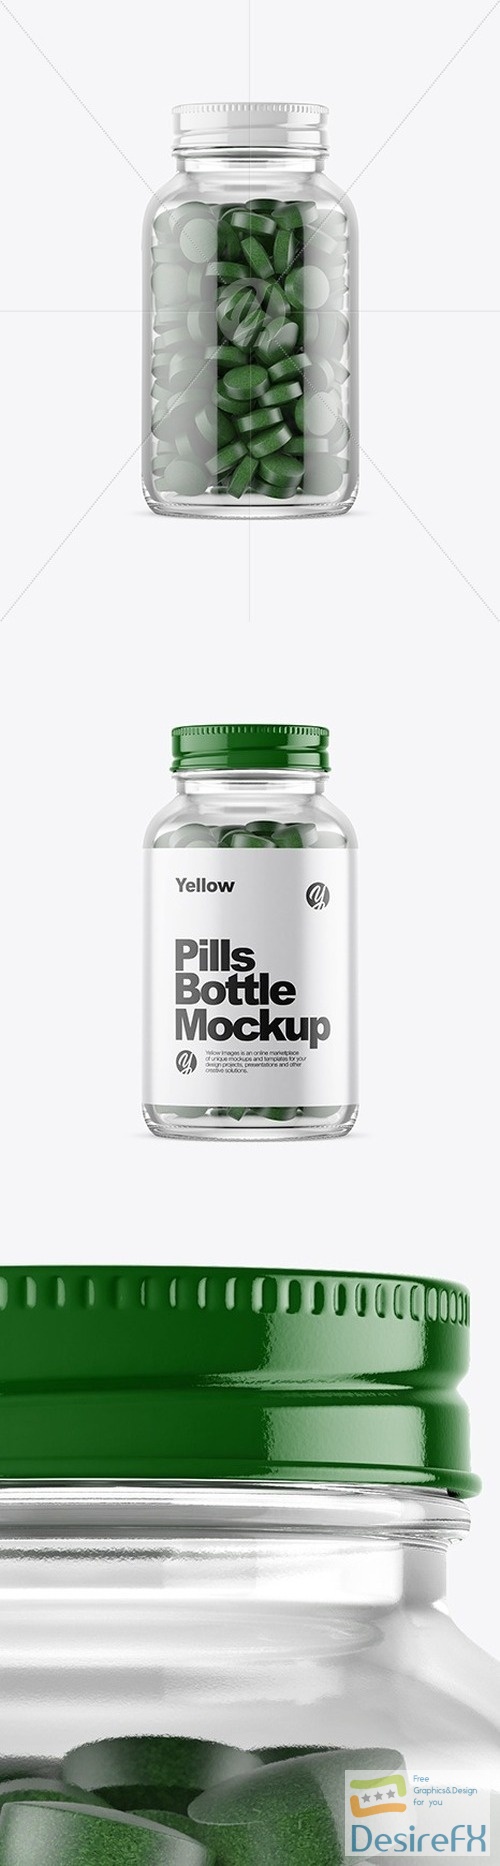 Clear Glass Bottle With Pills Mockup 51647